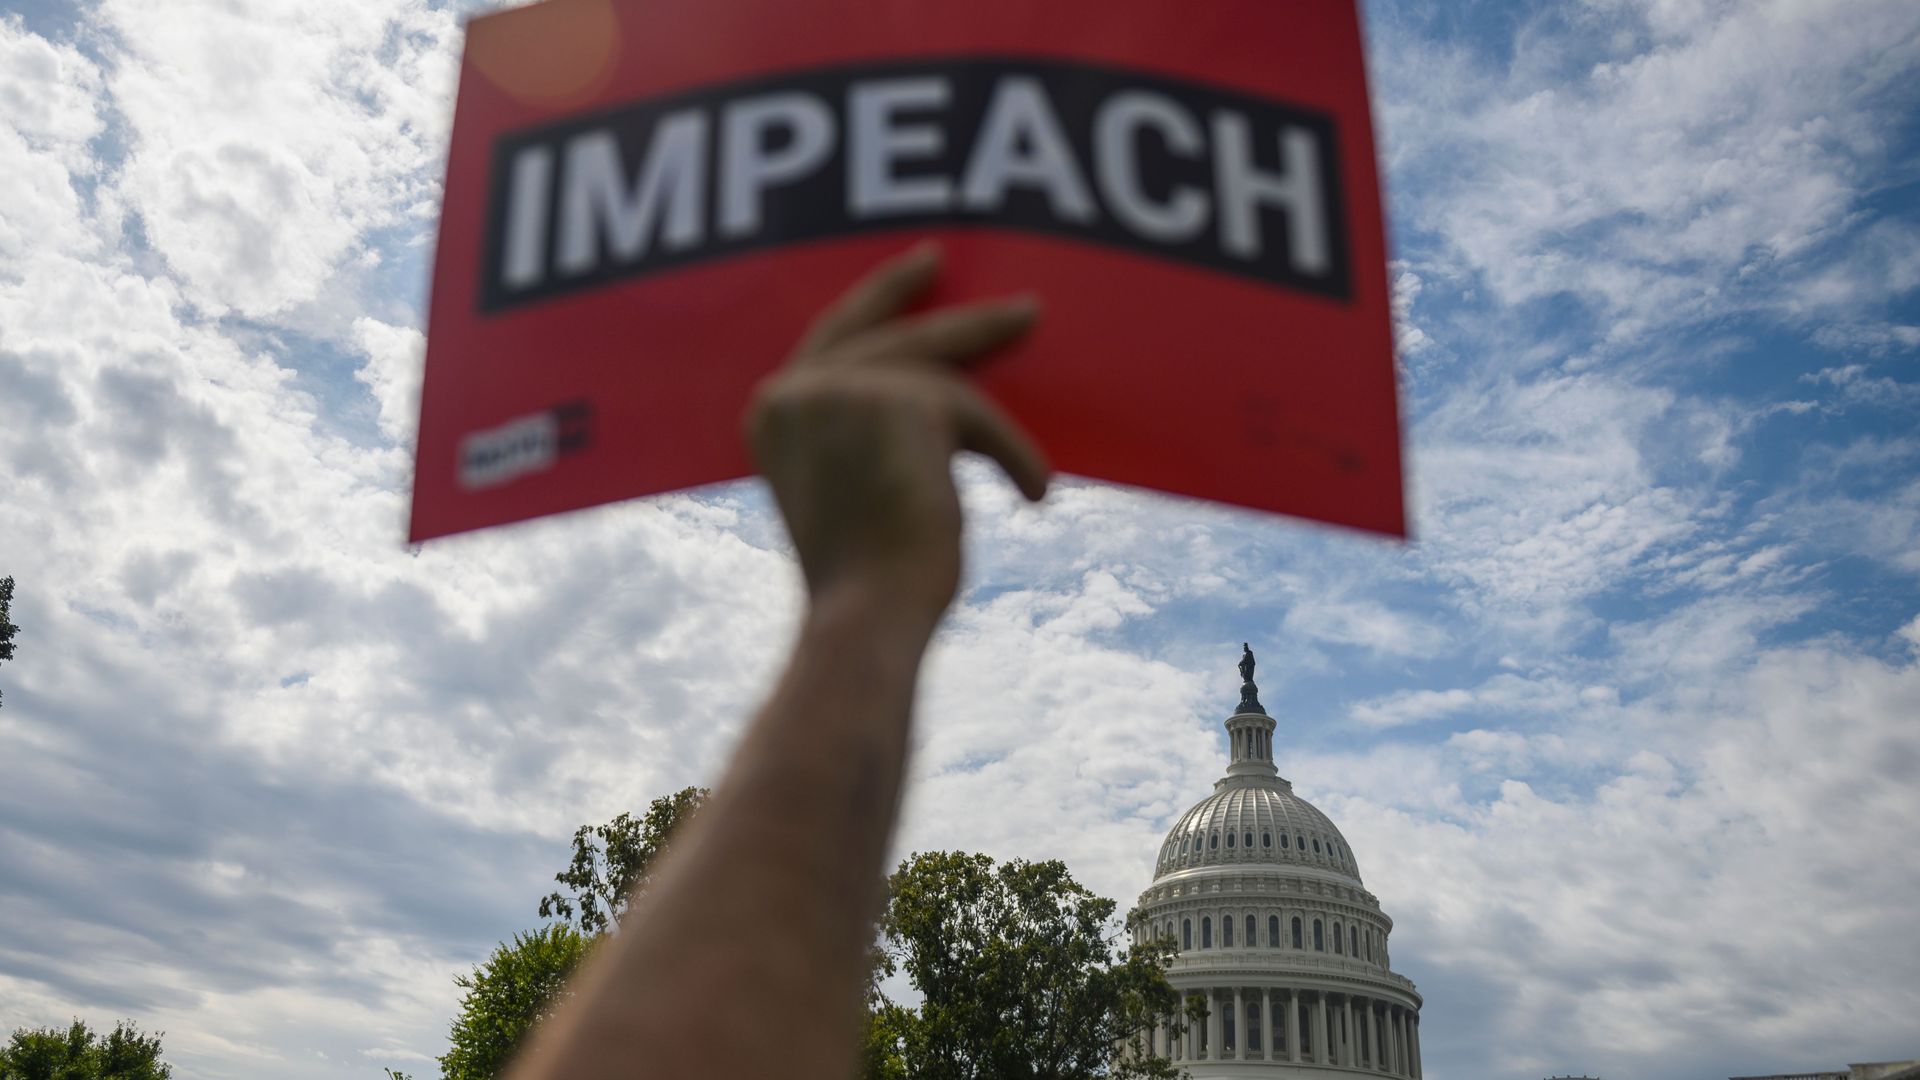 A protester holds up a sign reading "impeach" outside the US Capitol building